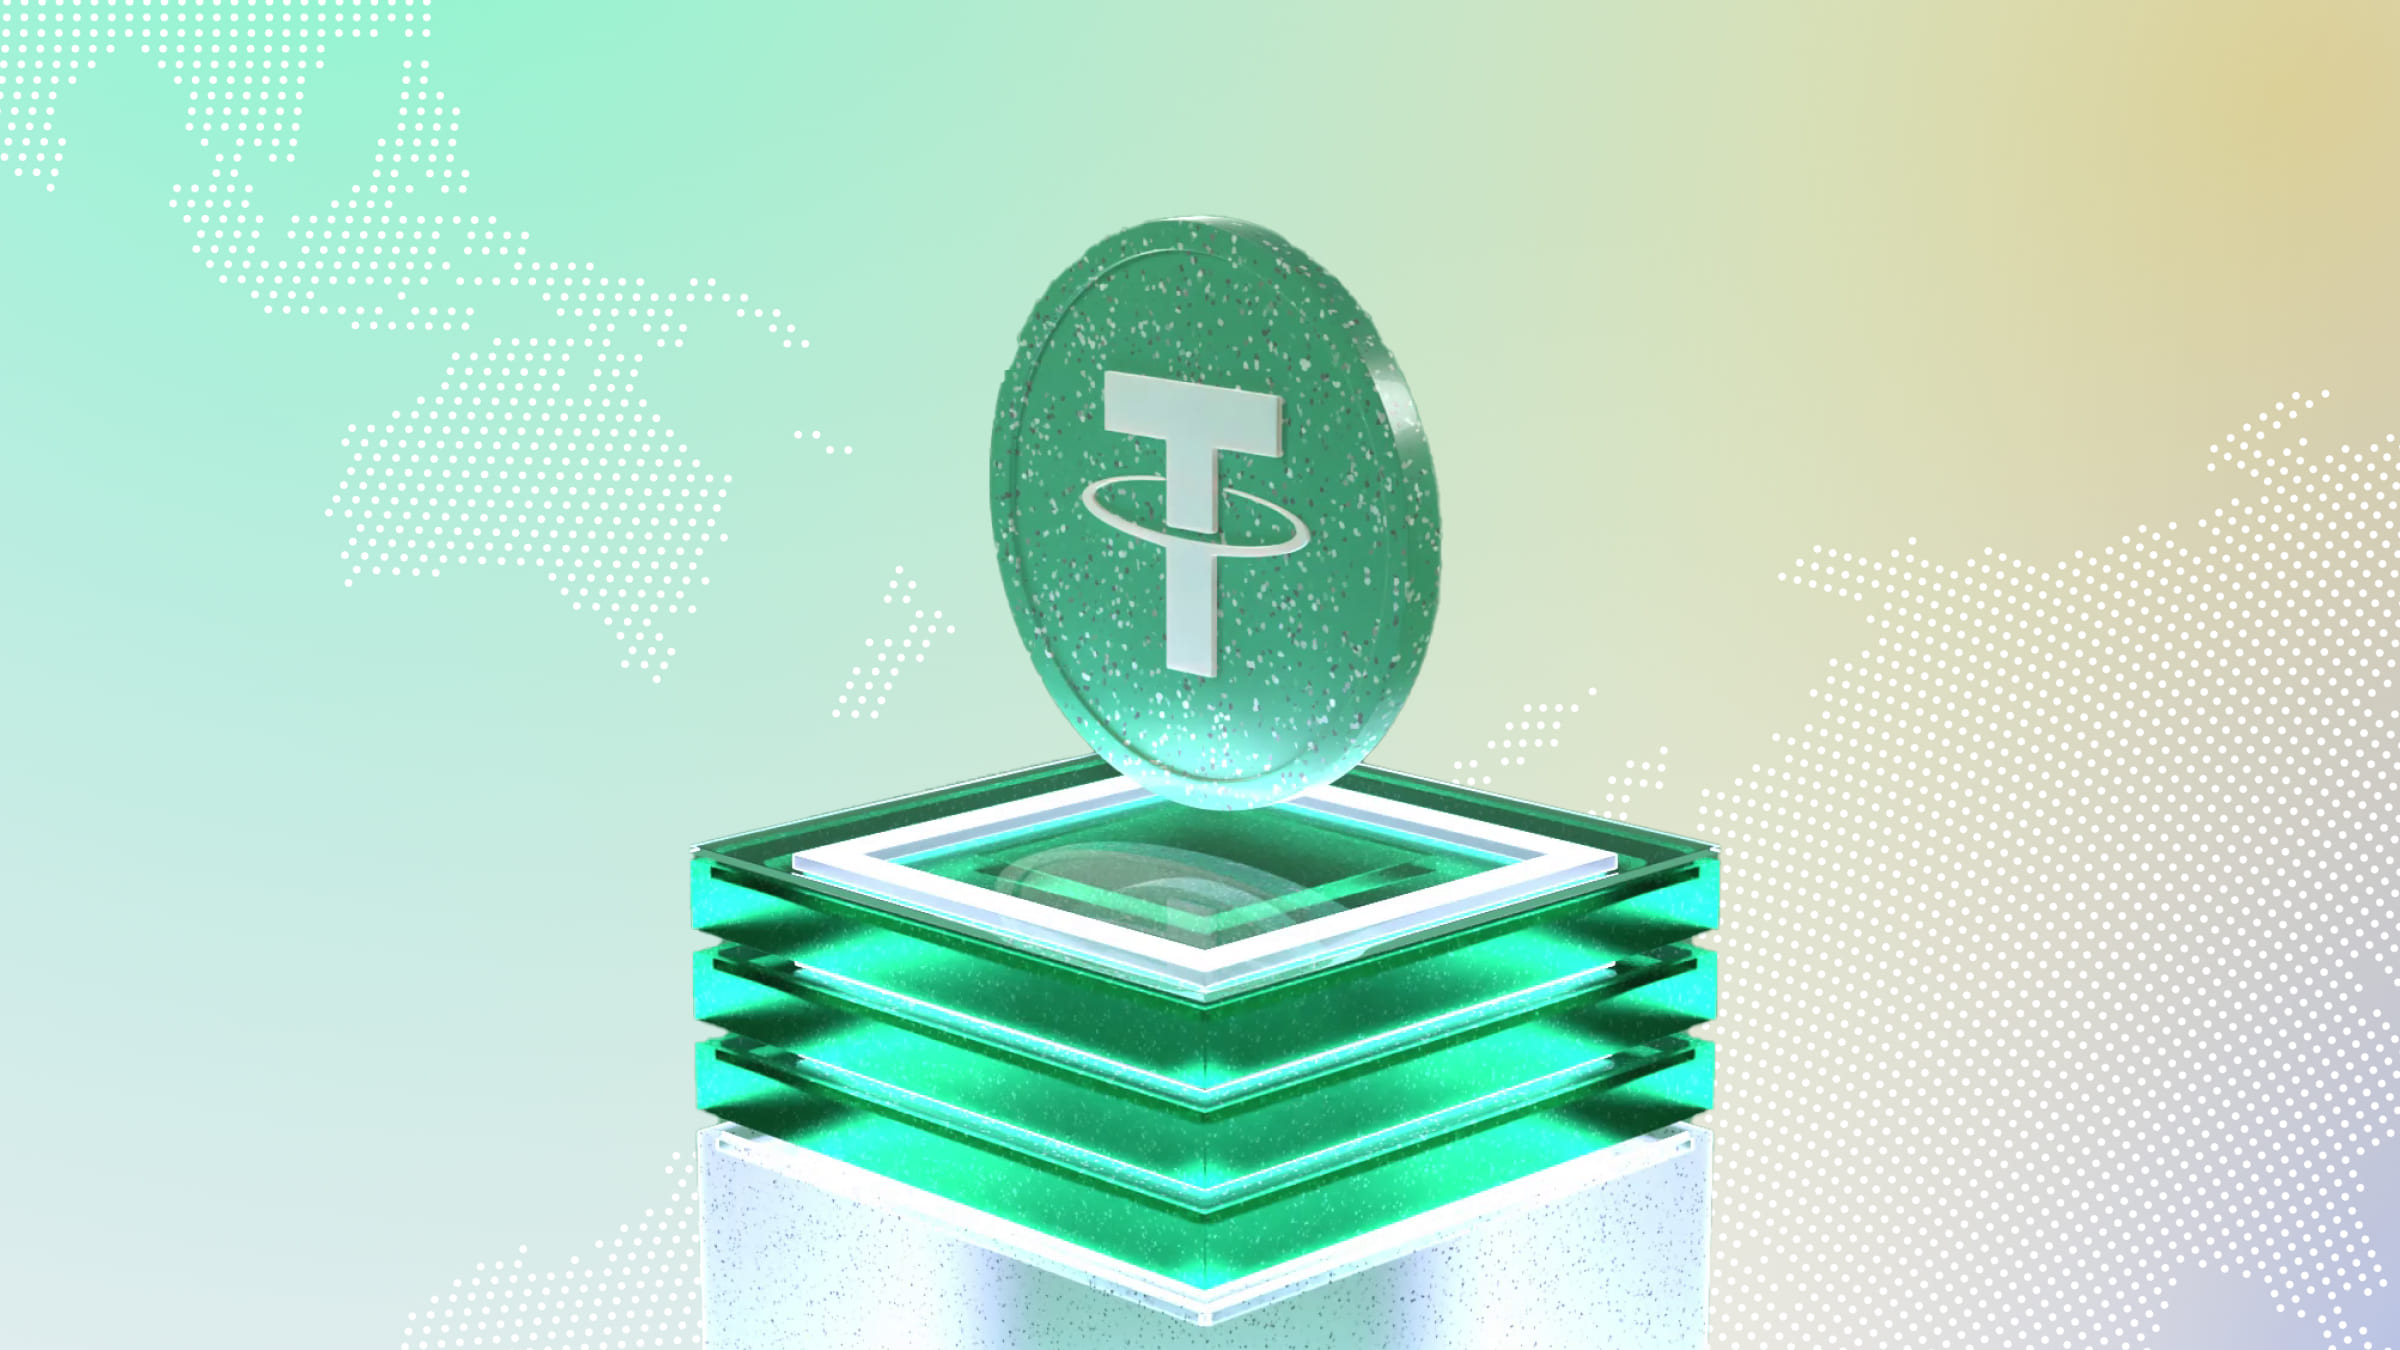 Stablecoin Tether ranks second on the list of cryptocurrencies by capitalization.